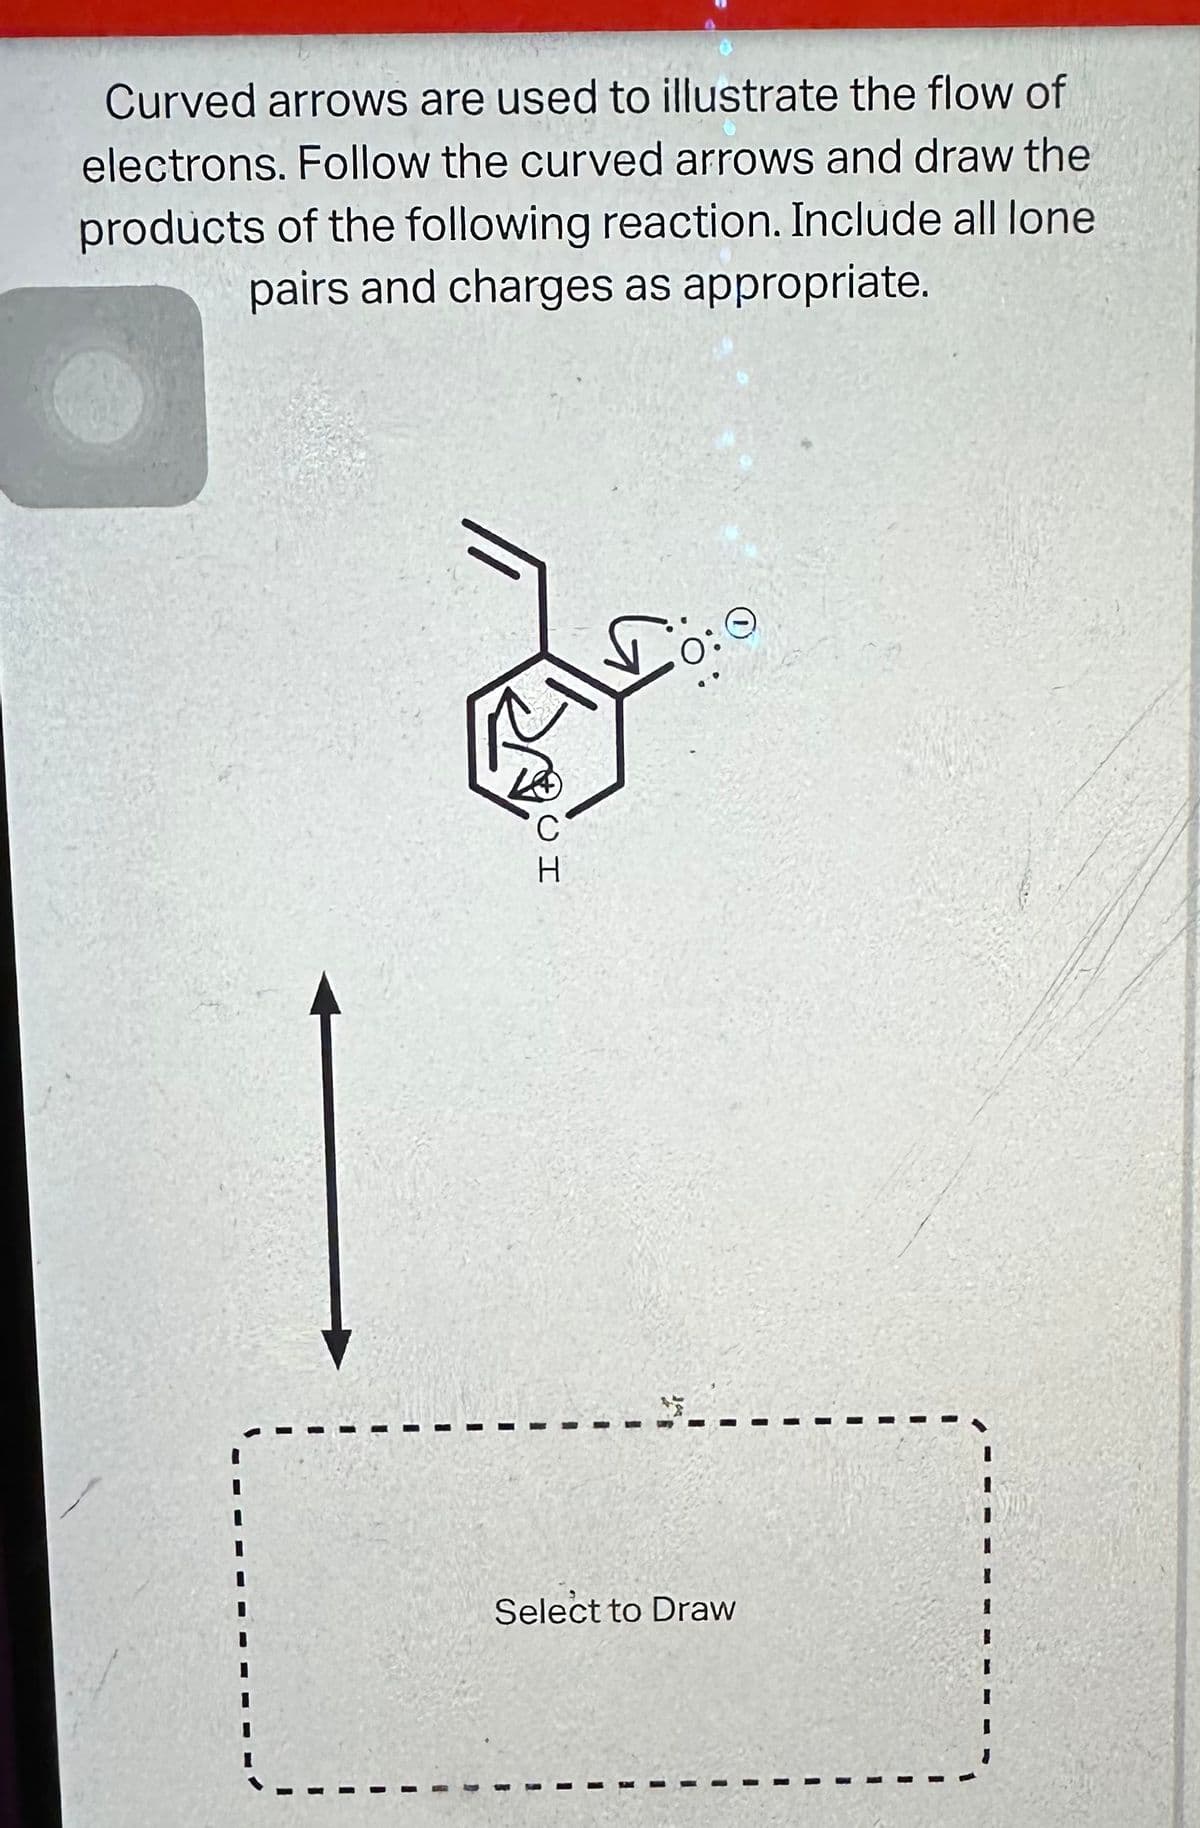 Curved arrows are used to illustrate the flow of
electrons. Follow the curved arrows and draw the
products of the following reaction. Include all lone
pairs and charges as appropriate.
...
C
H
$....
Select to Draw